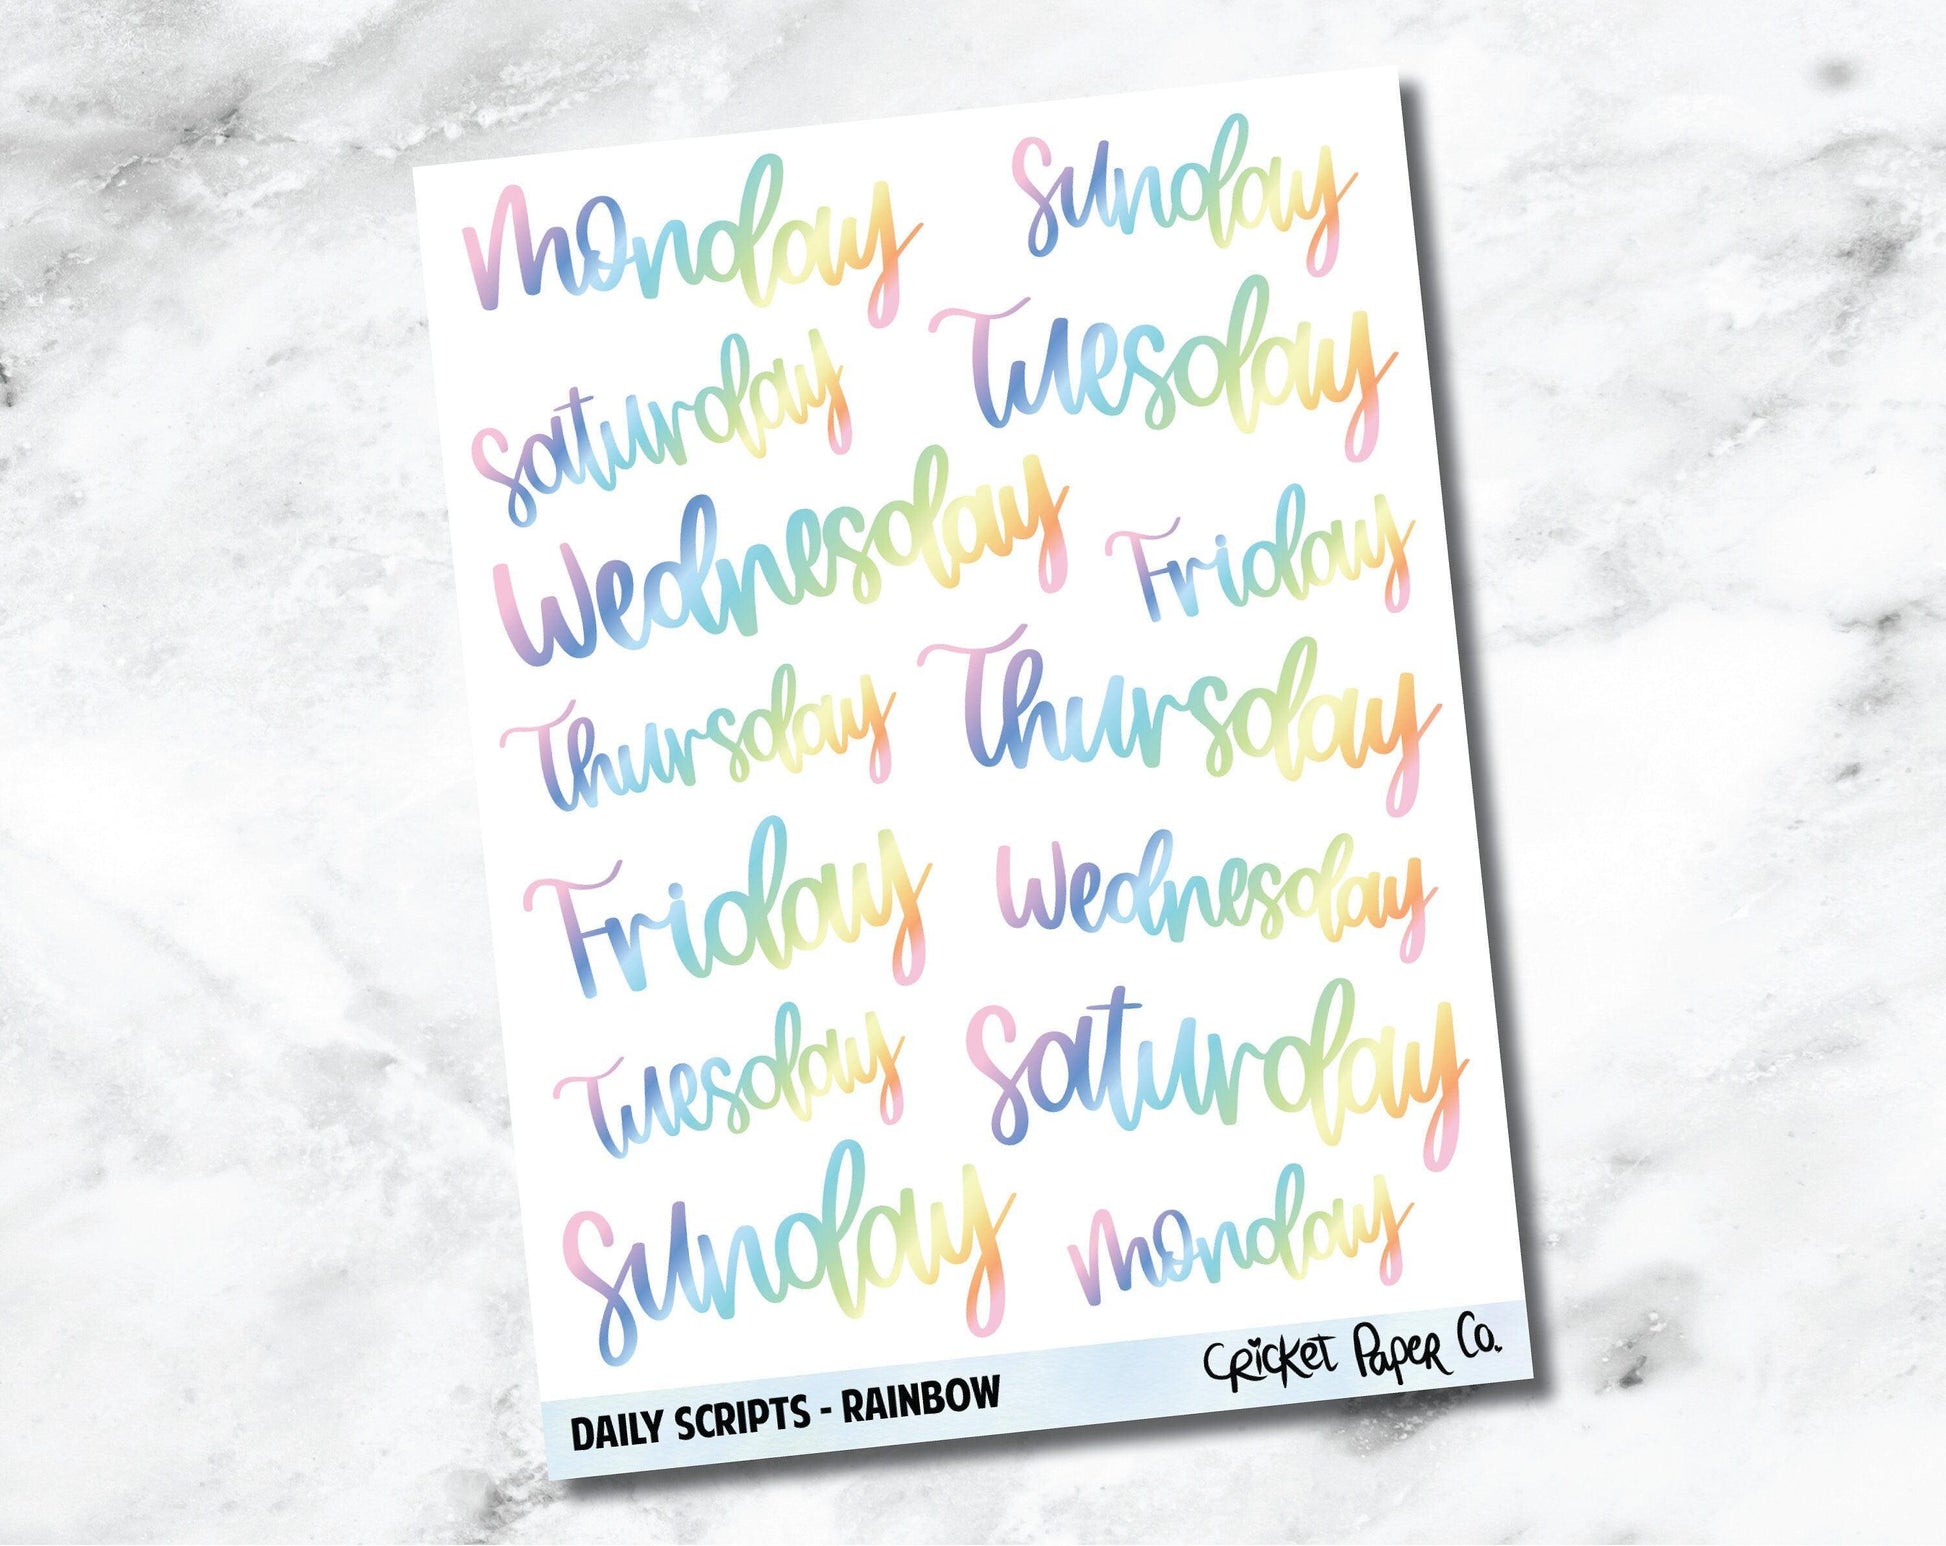 Days of the Week Hand Lettered Script Planner Stickers - Rainbow-Cricket Paper Co.